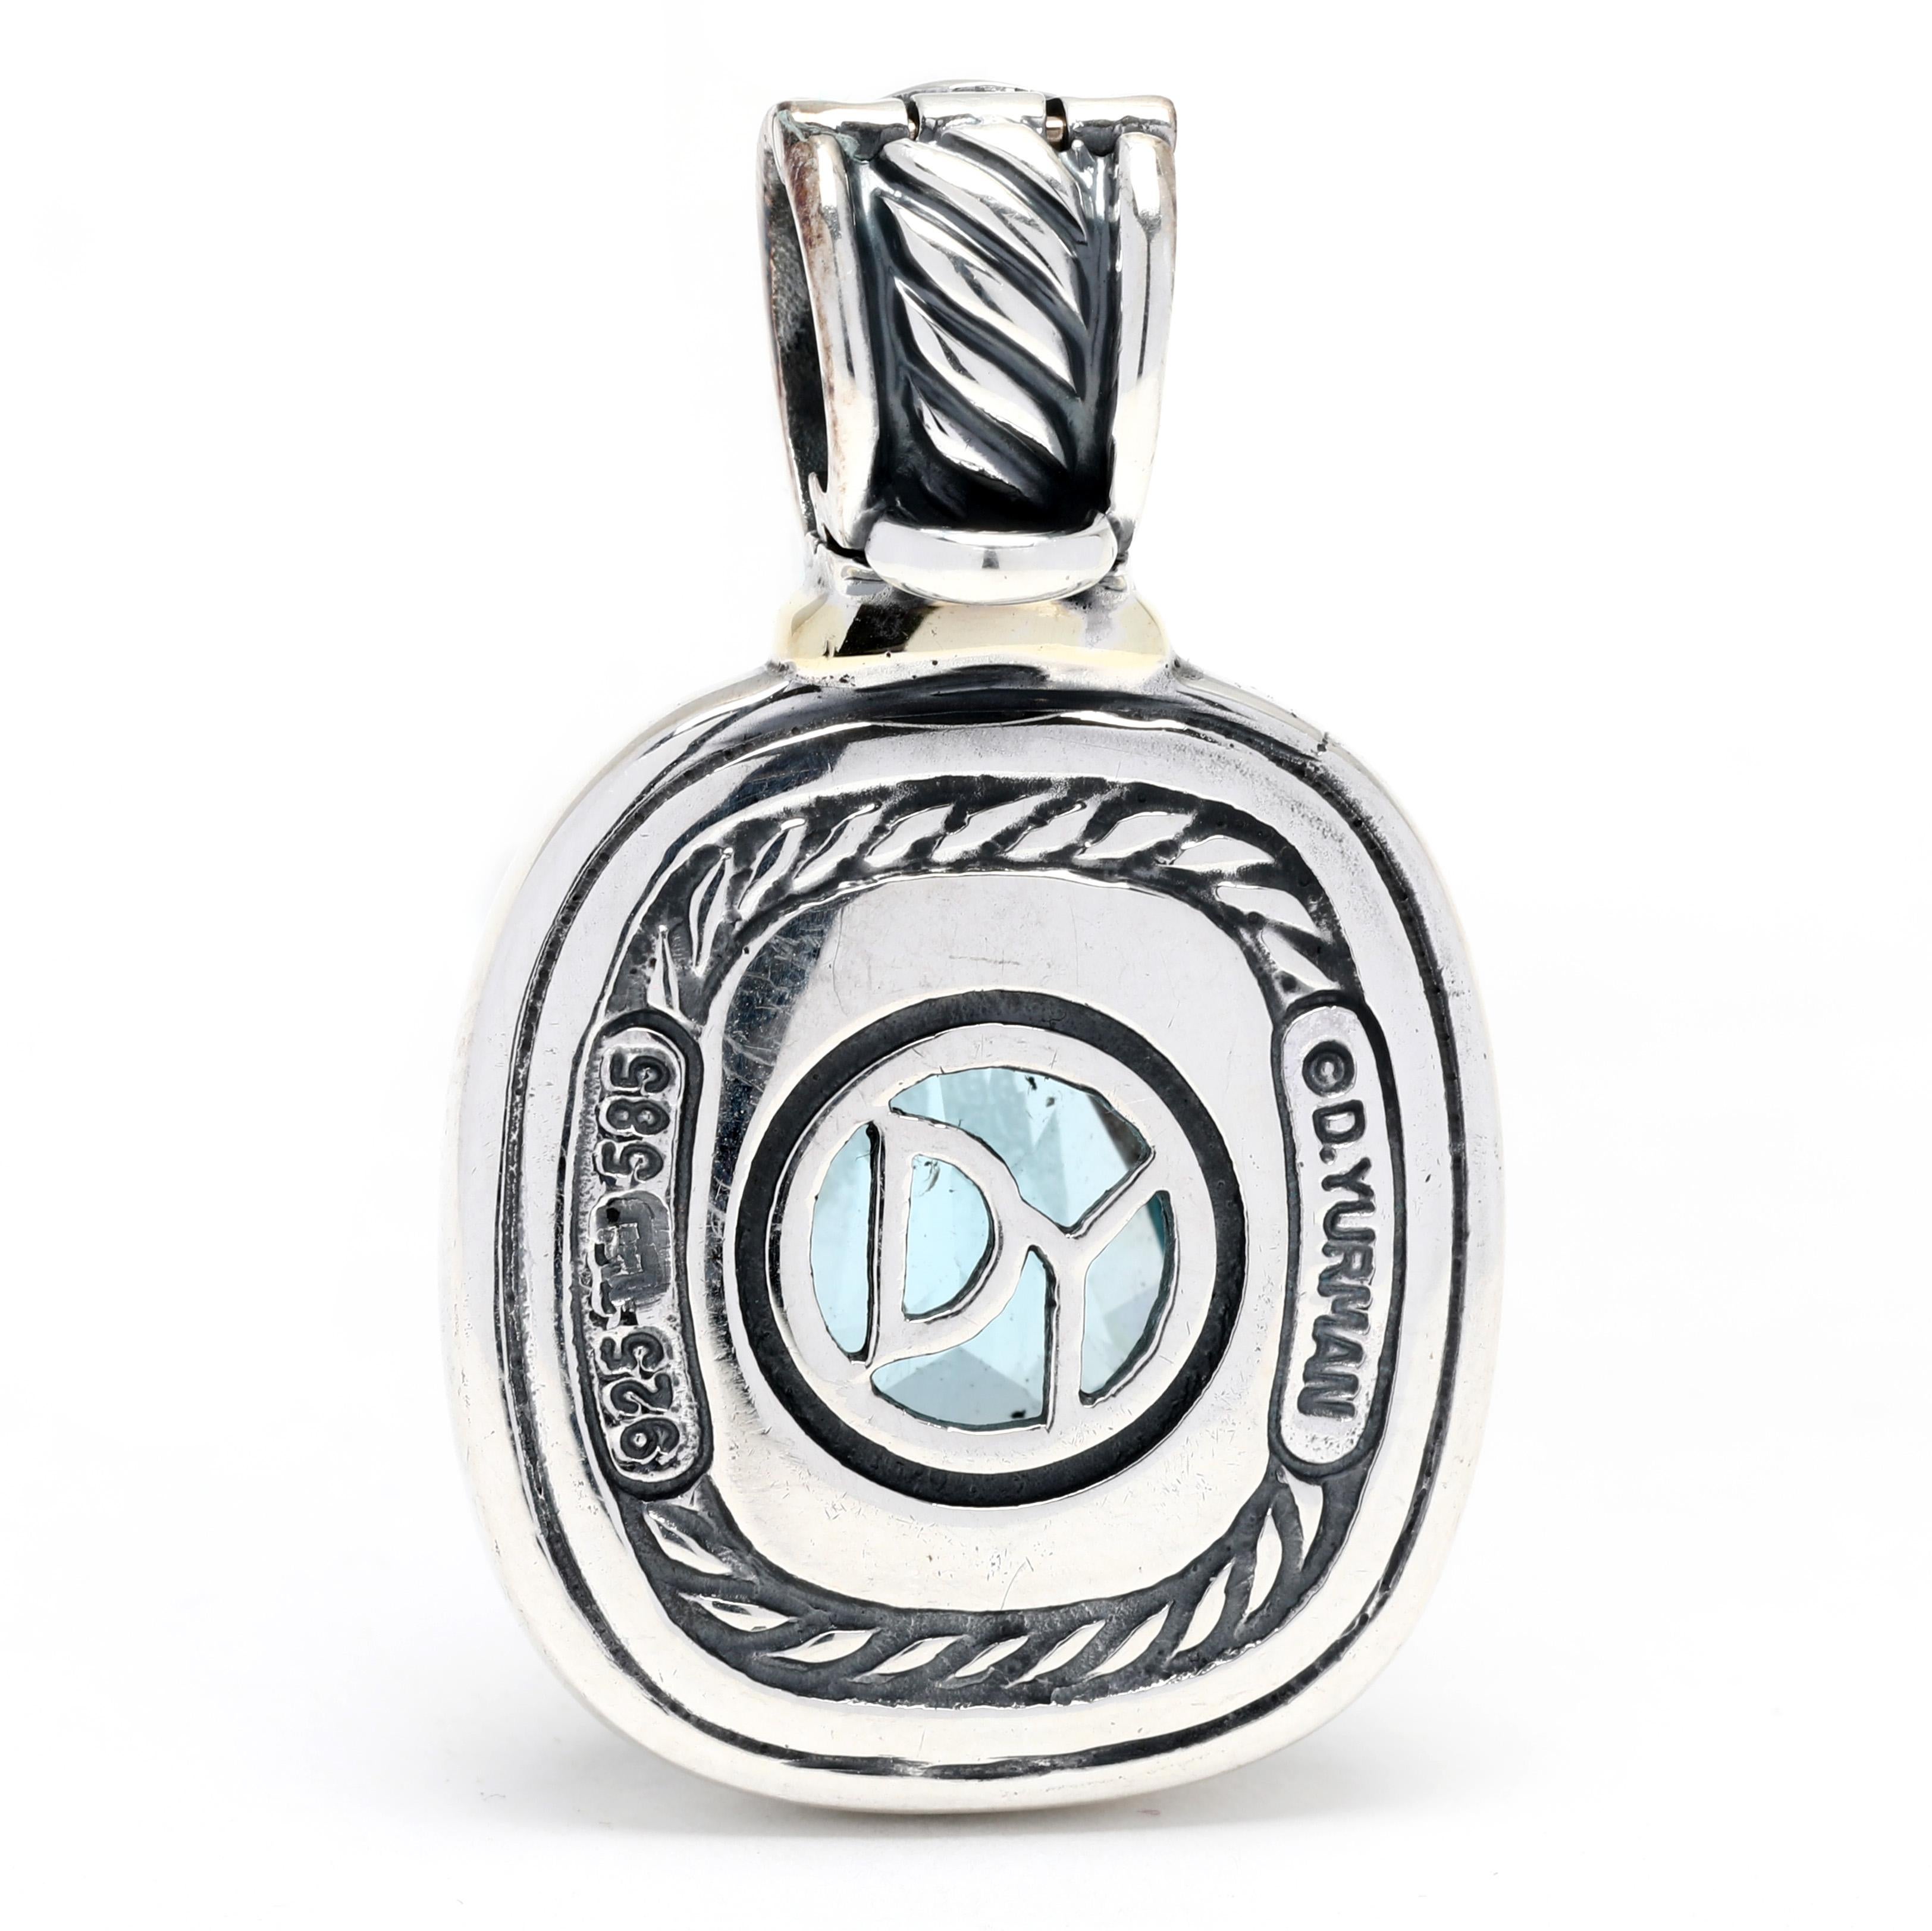 This stunning David Yurman Cable Classics Large Blue Topaz Enhancer is crafted in luxurious 14K yellow gold and sterling silver. This beautiful enhancer has a length of 1 1/8 inches and features a sparkling blue topaz gemstone. Perfect for any